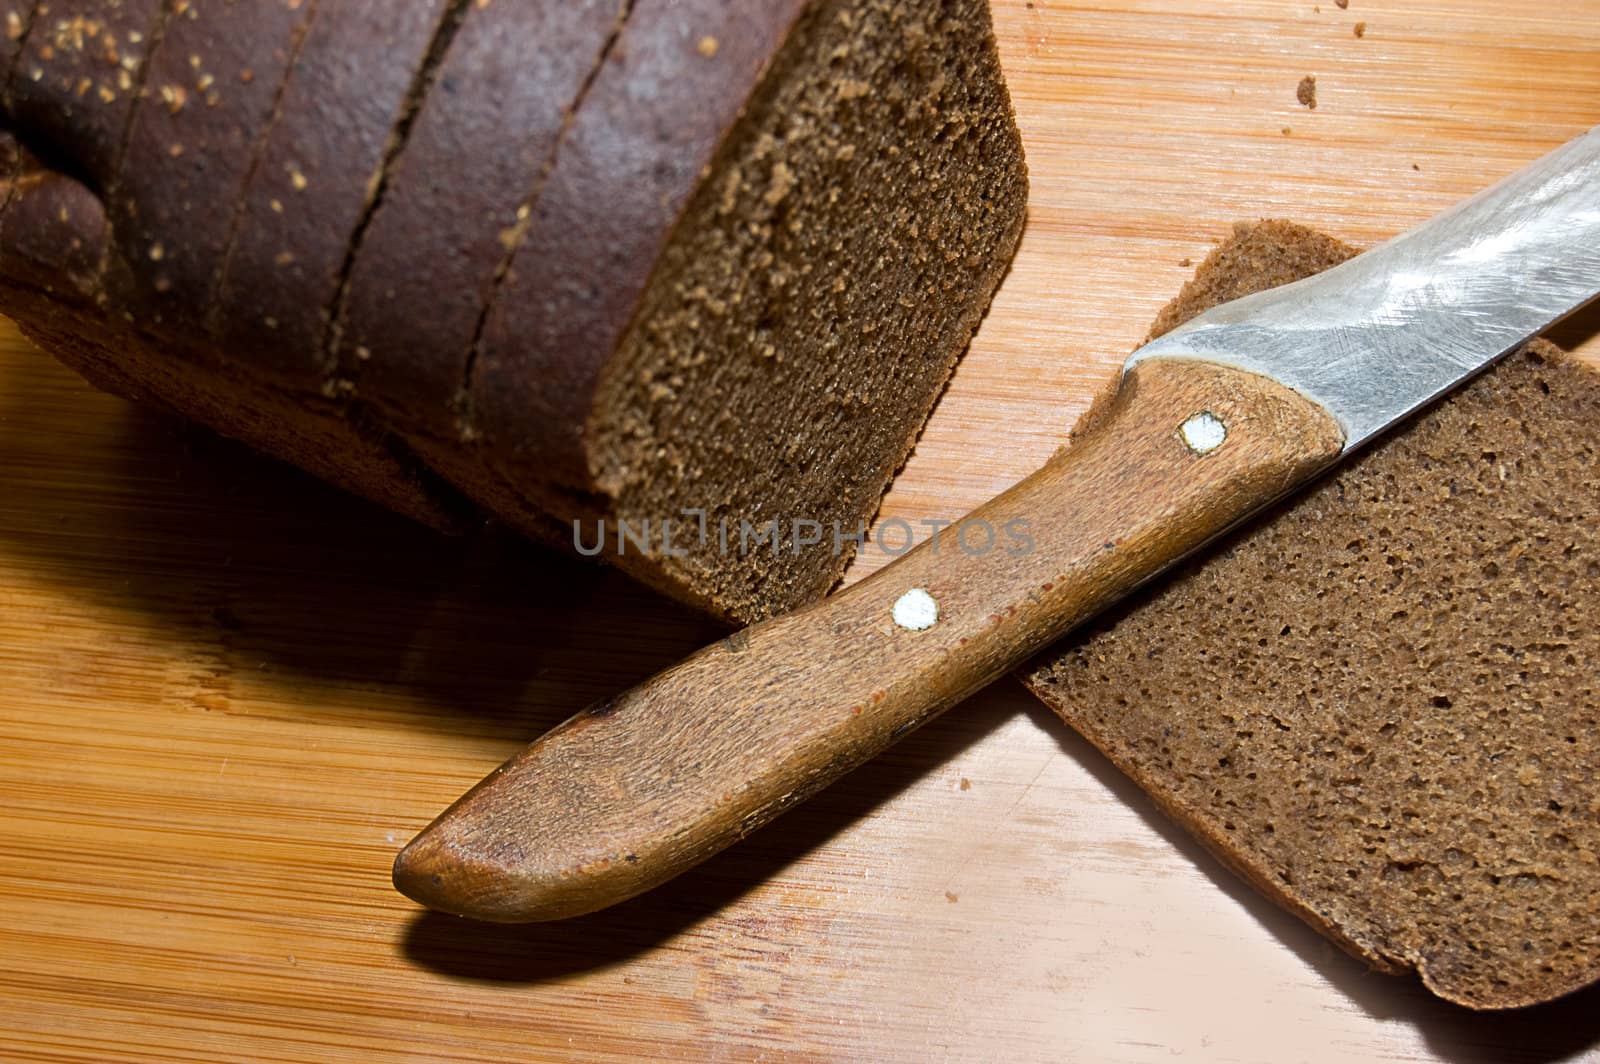 Loaf of black bread and knife on wooden board